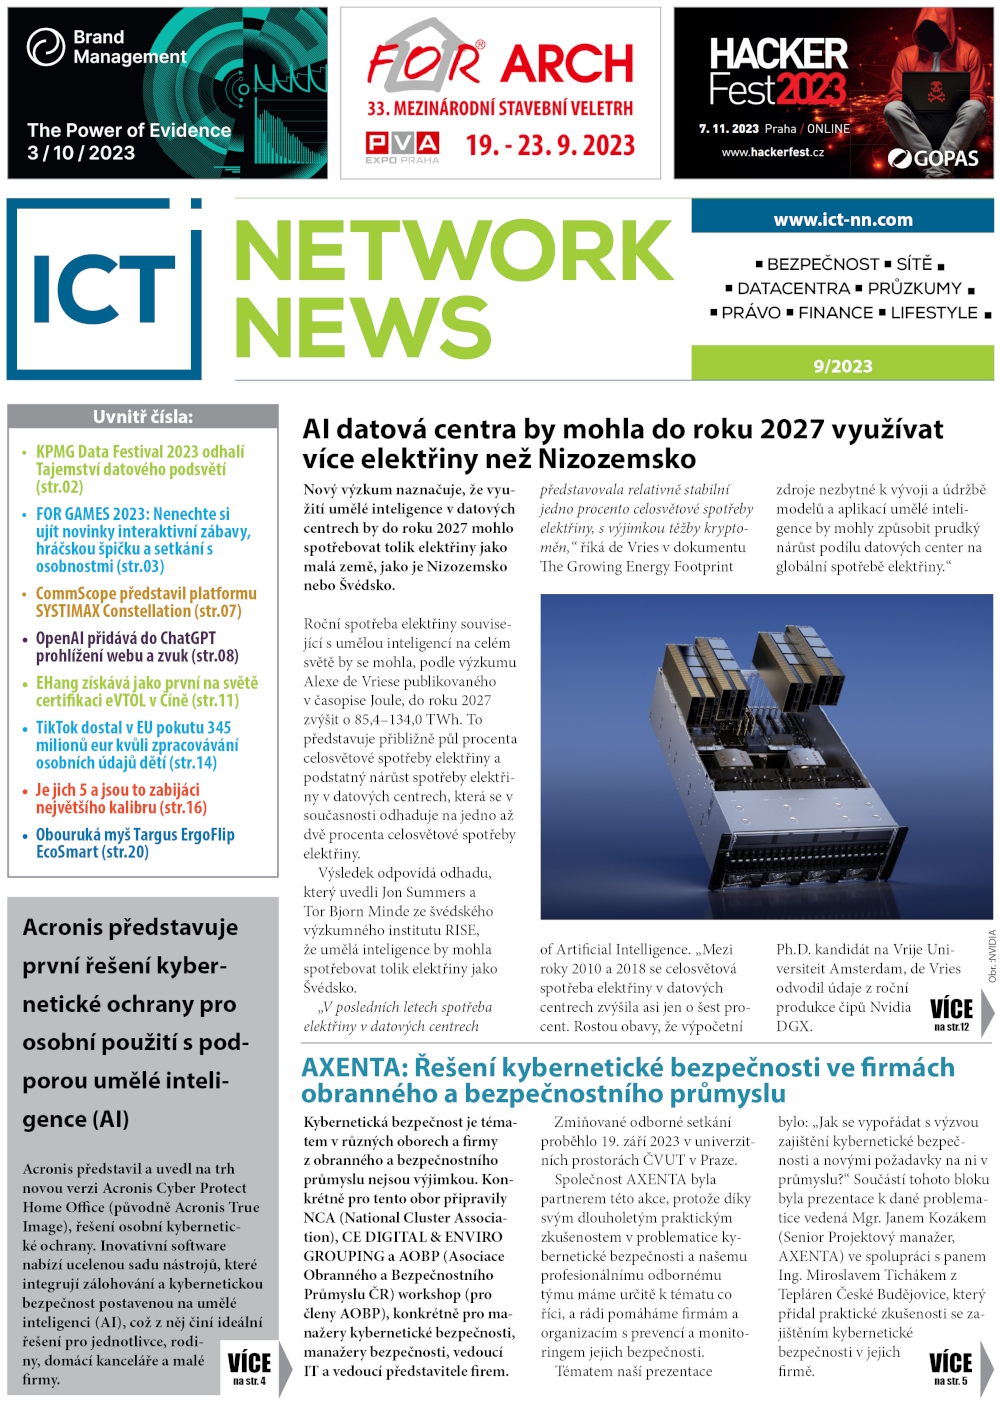 ICT NETWORK NEWS 9-2023 cover